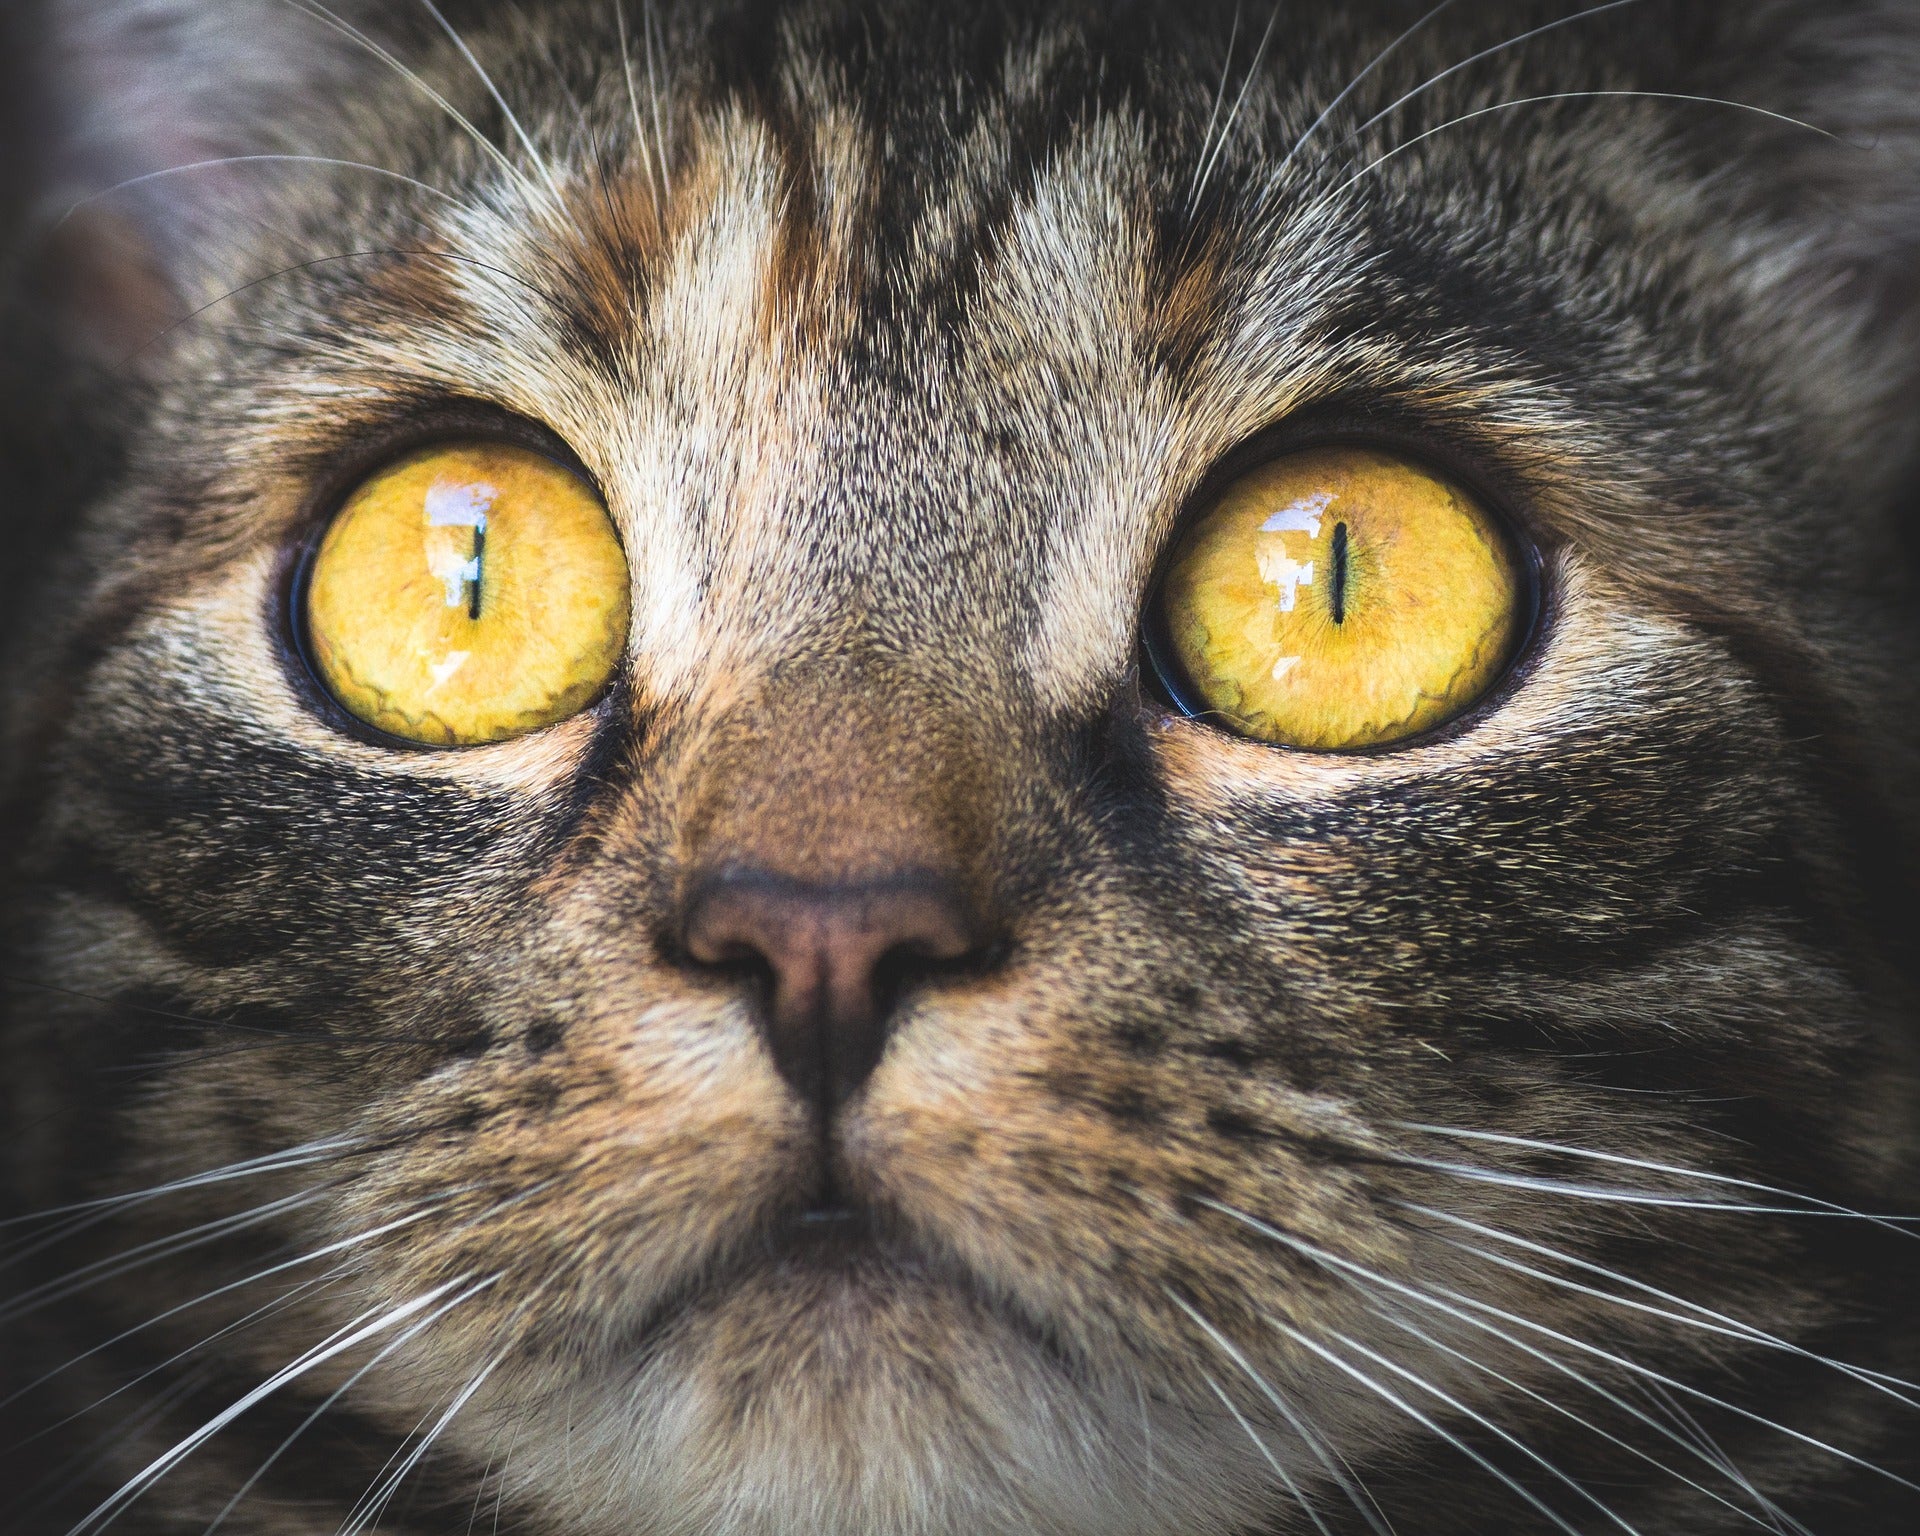 The characteristics of the eye shape in the breed of cat as